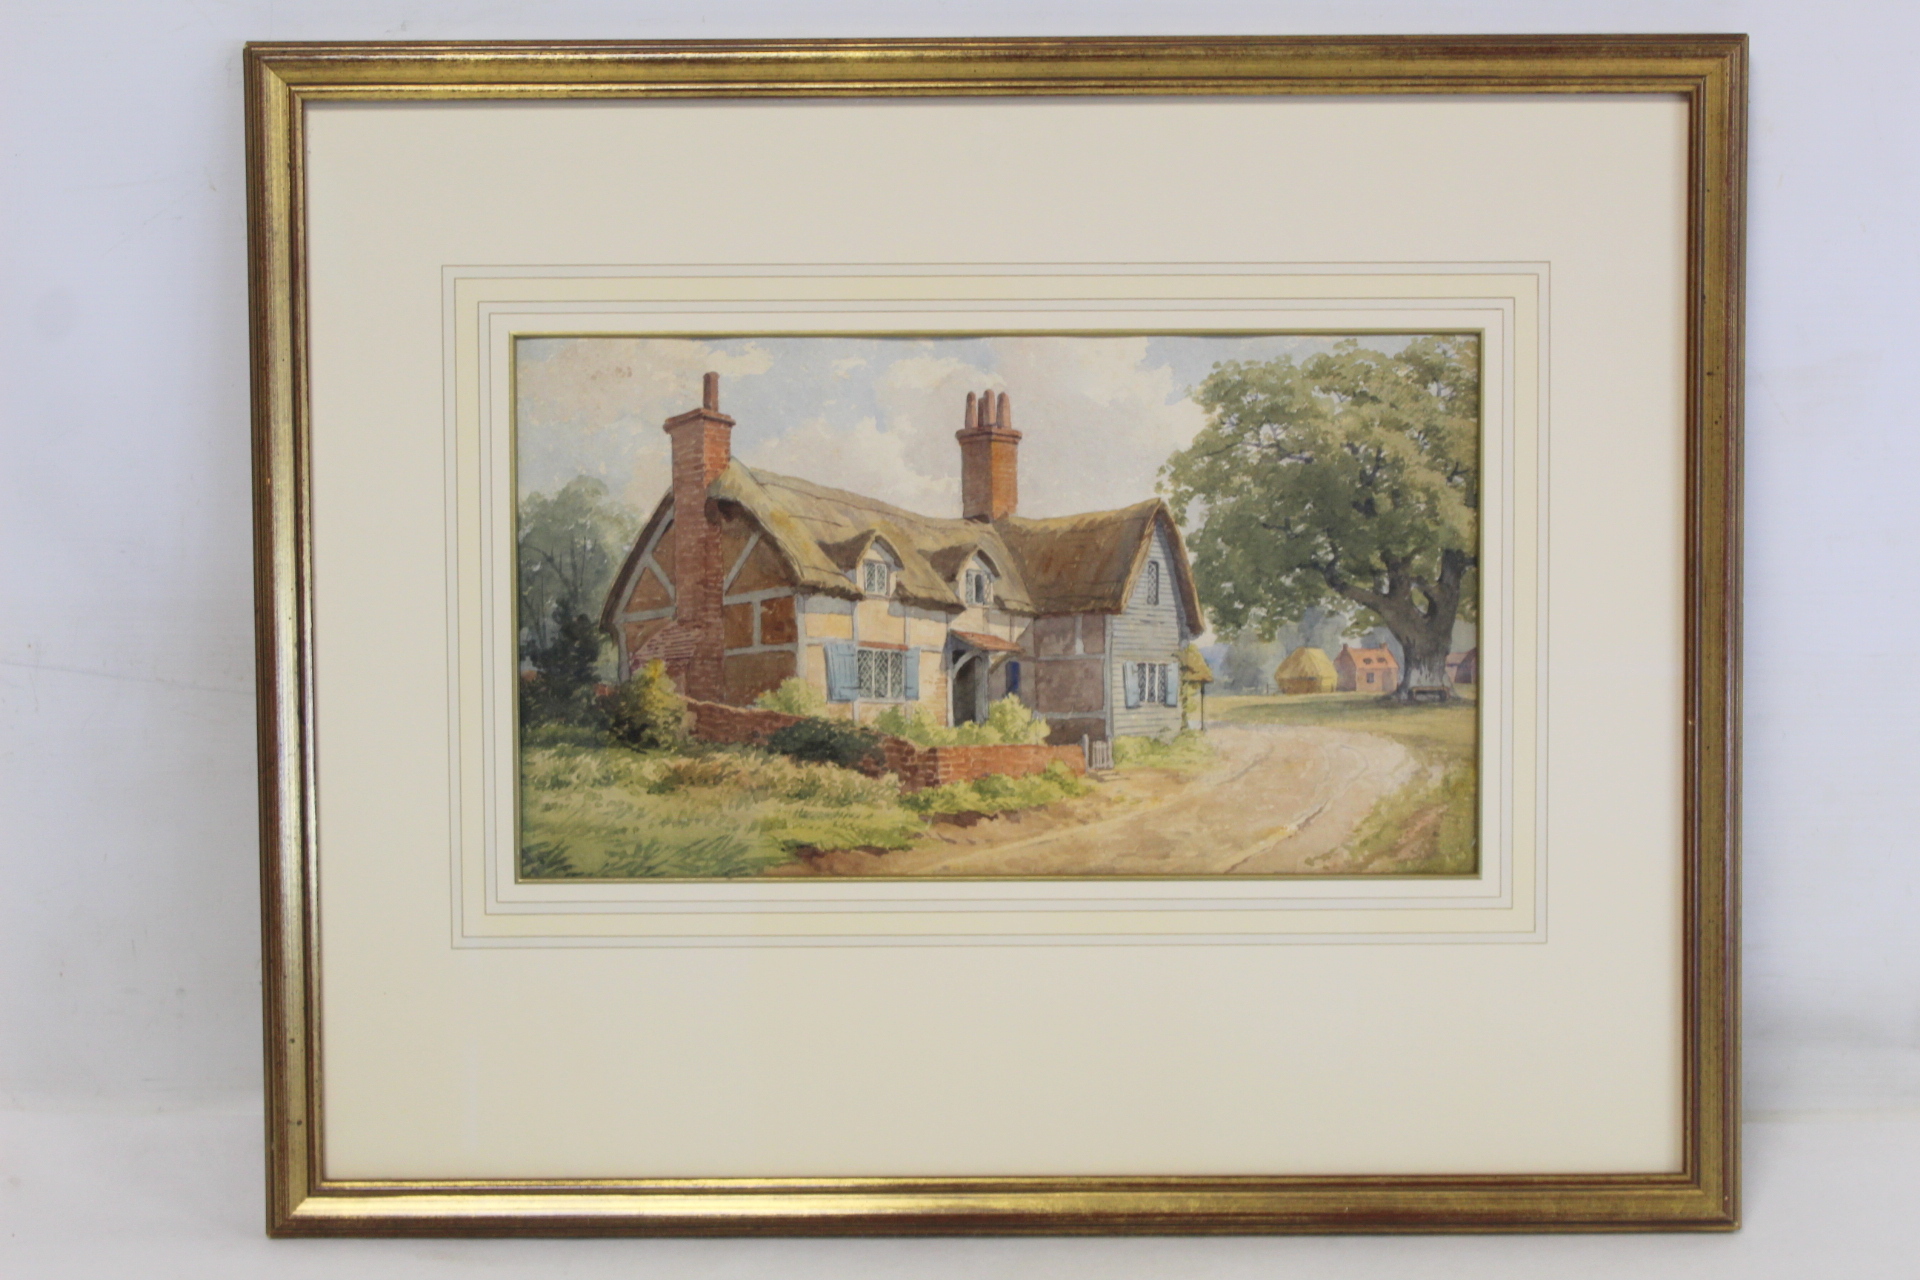 LATE 19TH/EARLY 20TH CENTURY ENGLISH SCHOOL. Thatched farmhouse. Watercolour. 19.5cm x 45cm.